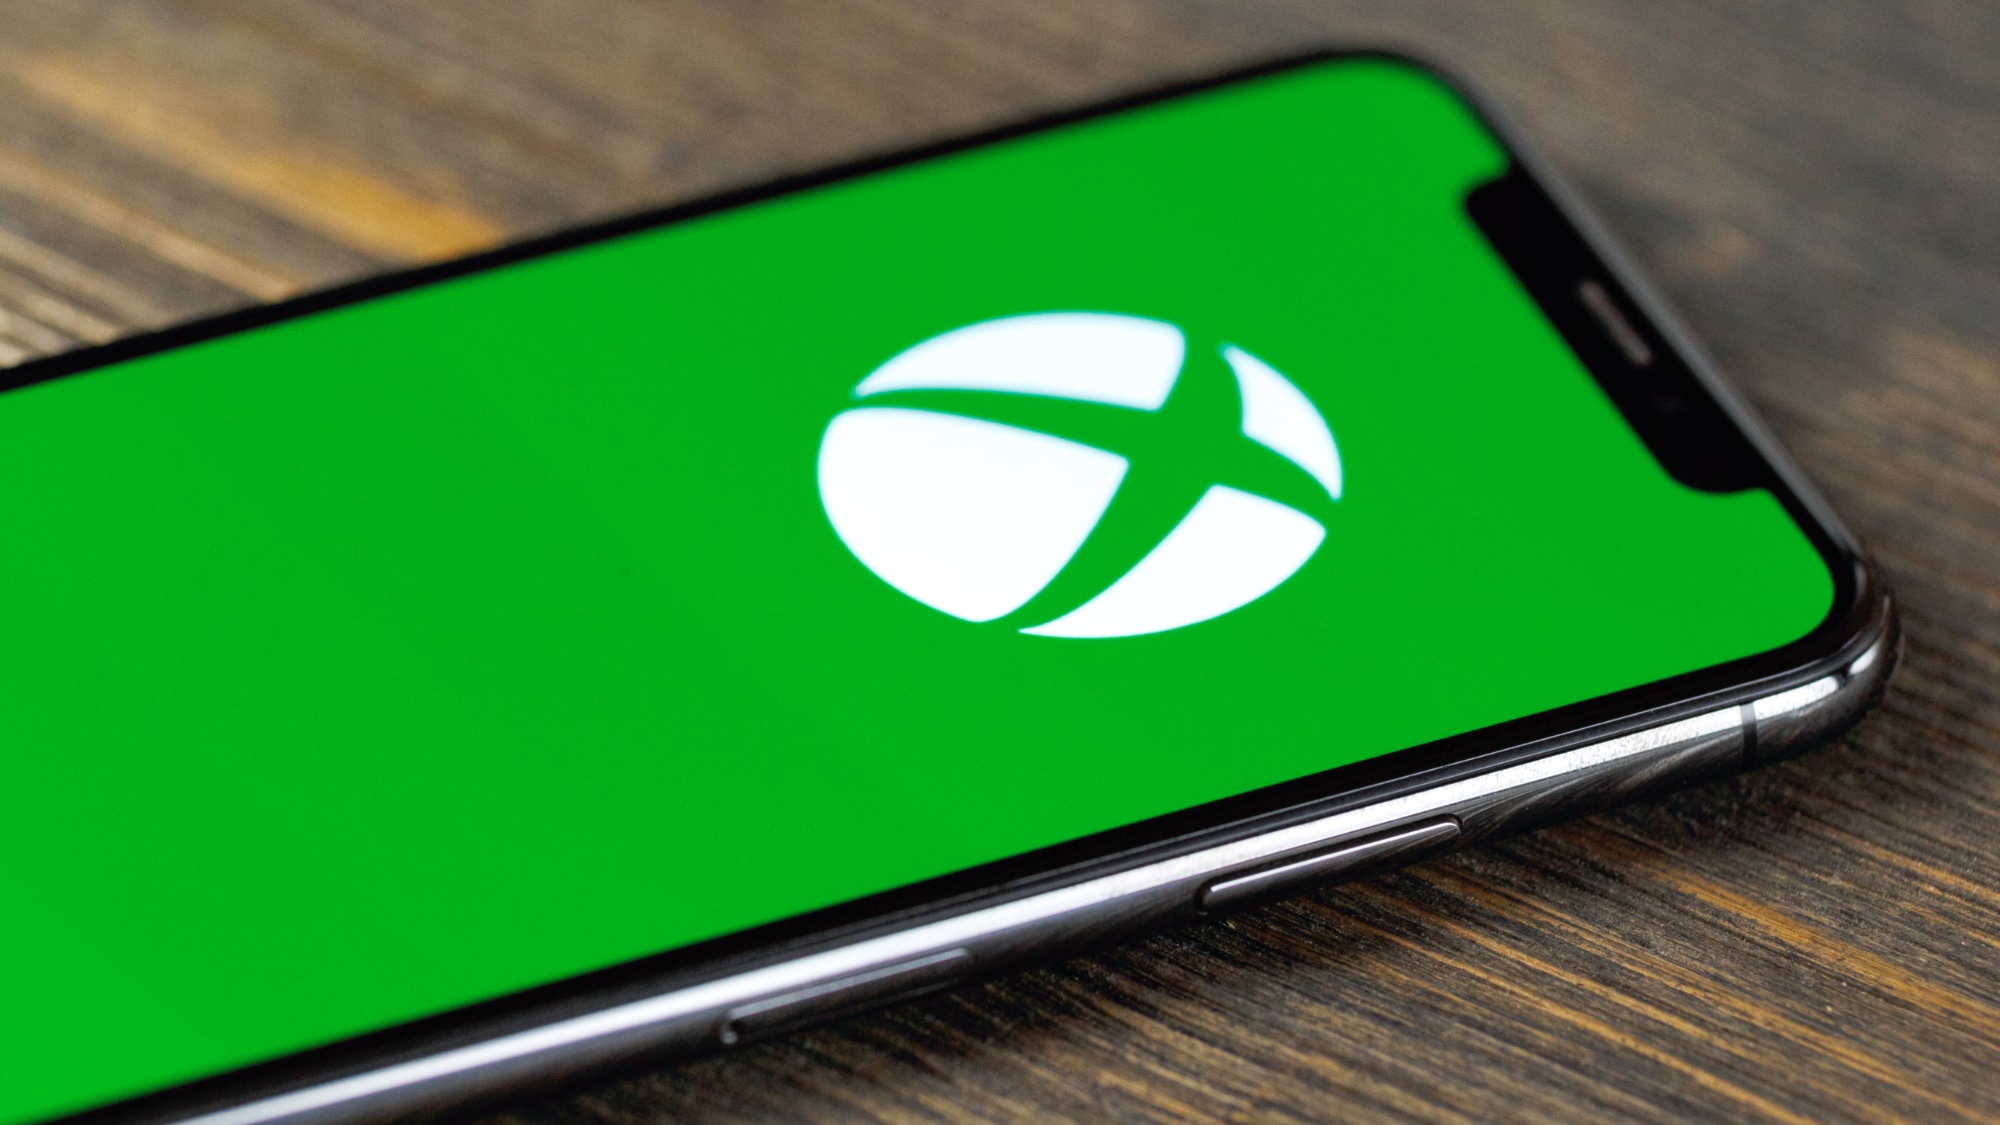 Classic Xbox Games On iPhone Could Be Coming Soon Via New Xbox Game Store